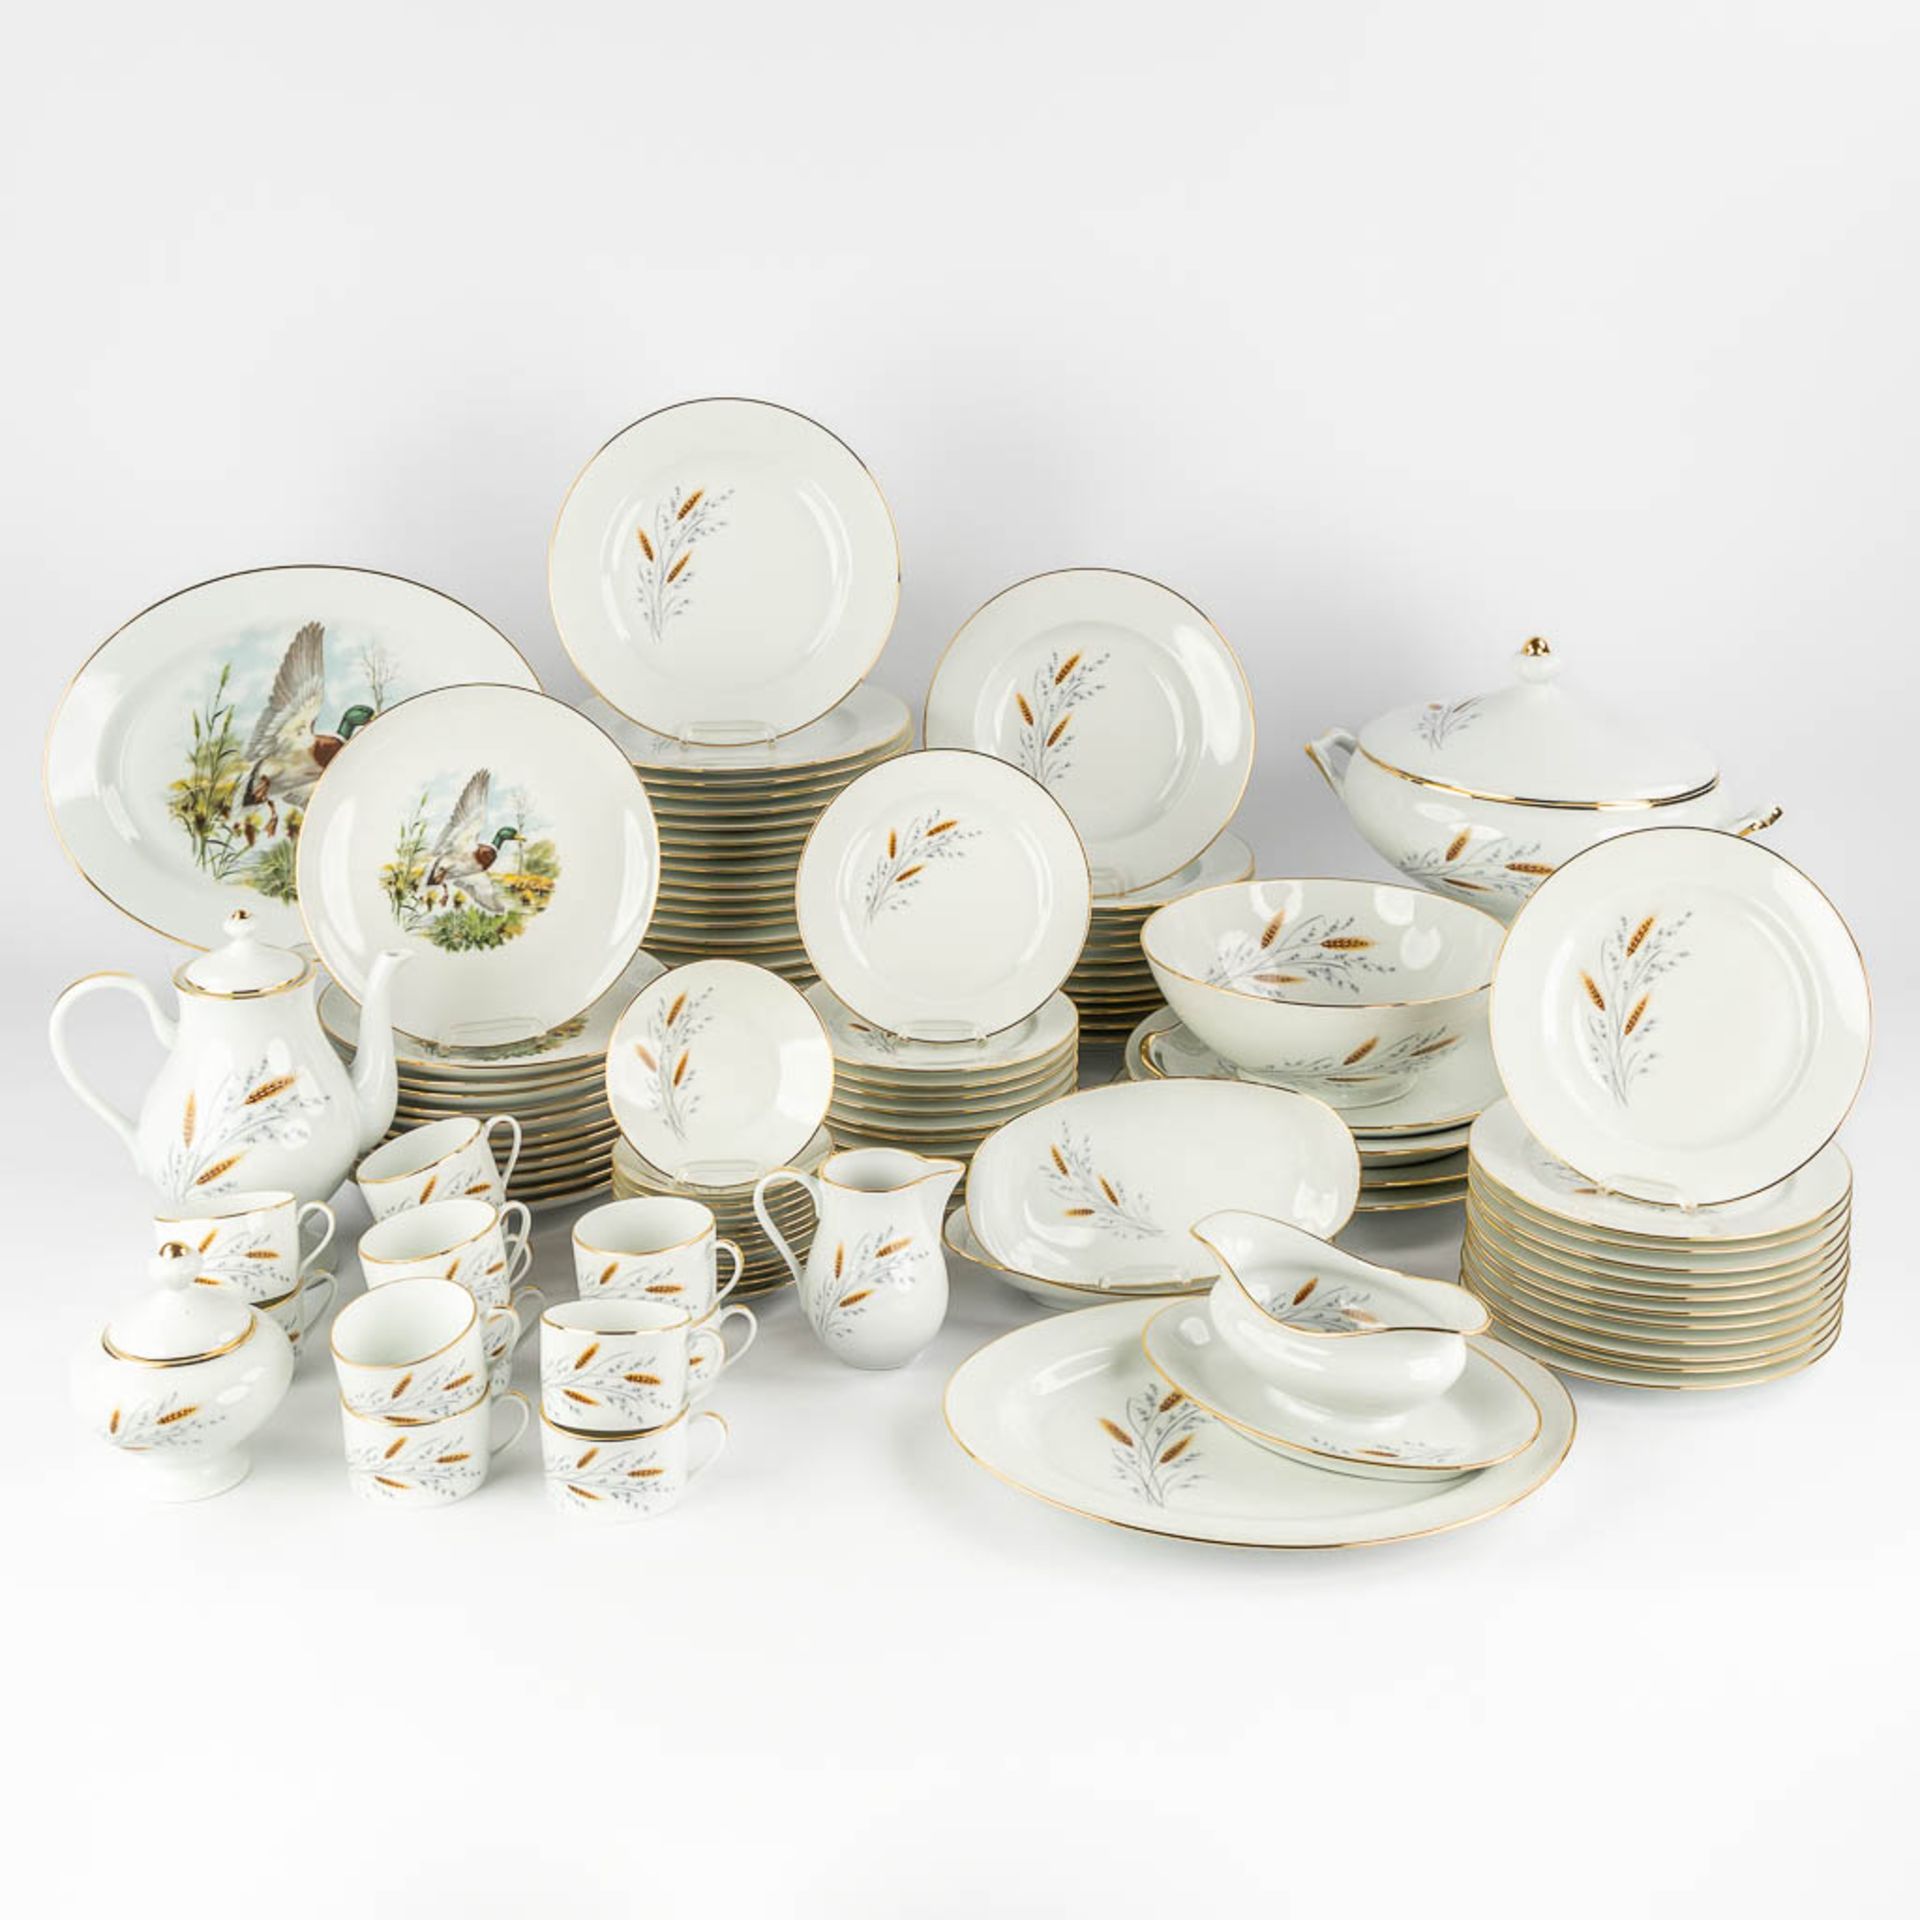 Limoges, France, a large, 12-person dinner, wild and coffee service. (L:23 x W:34 x H:22 cm)